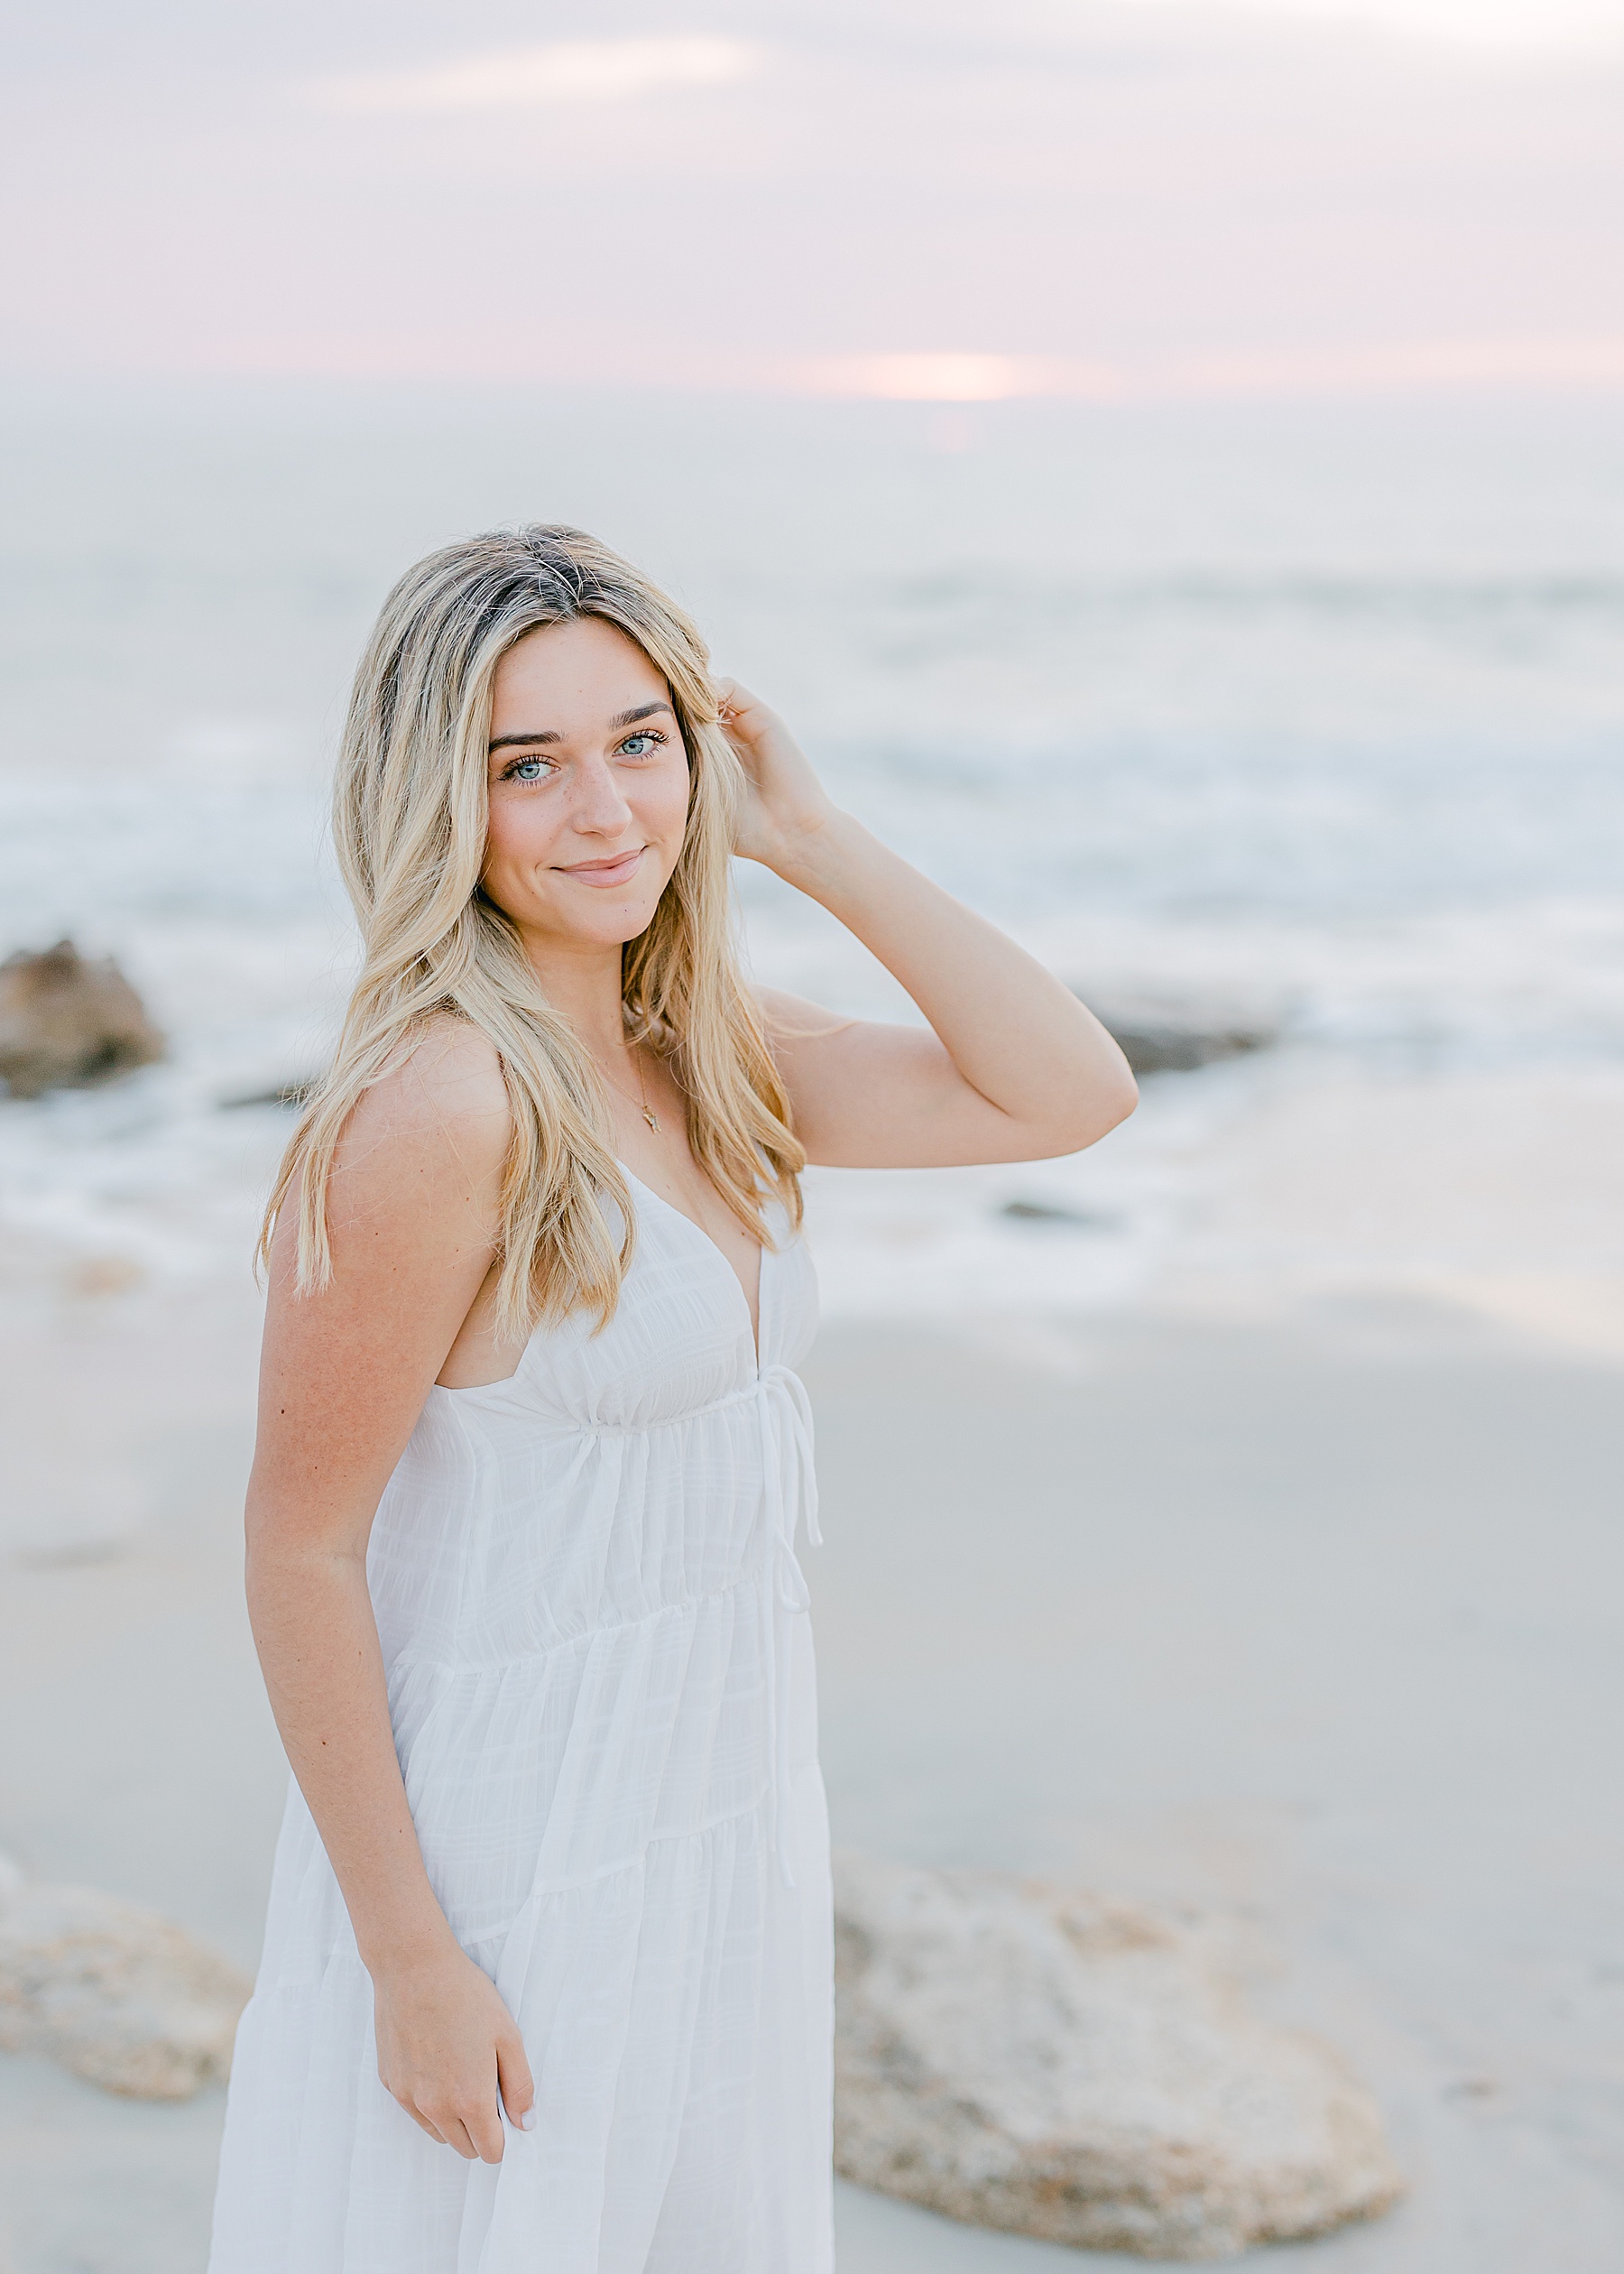 grad senior standing on the beach at sunrise in florida wearing a long white dress